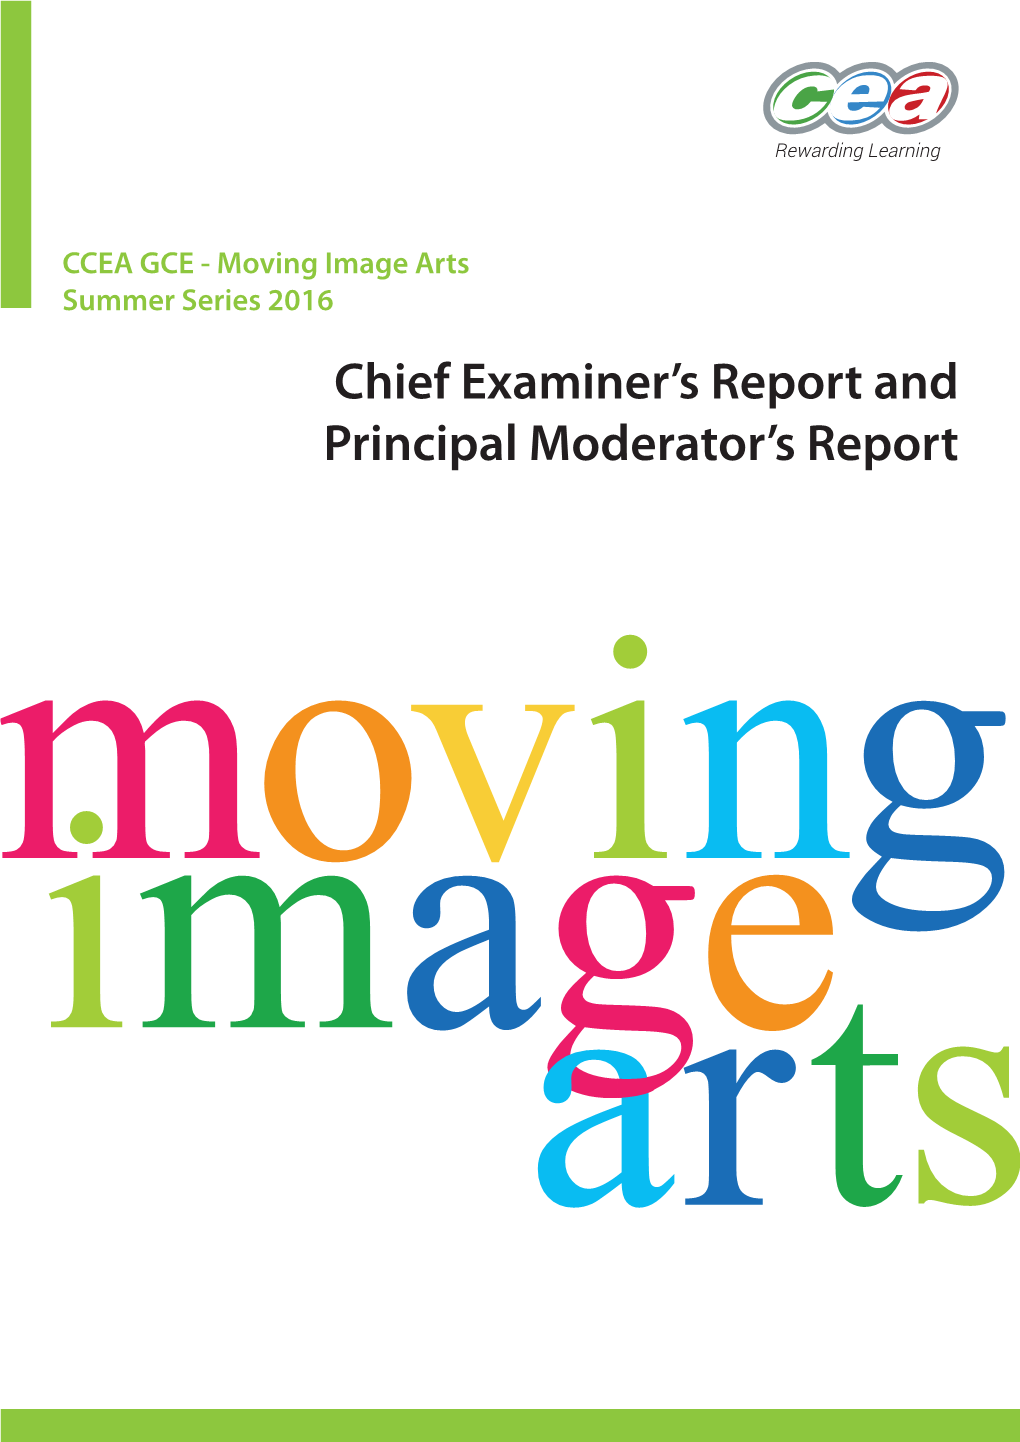 Chief Examiner's Report and Principal Moderator's Report